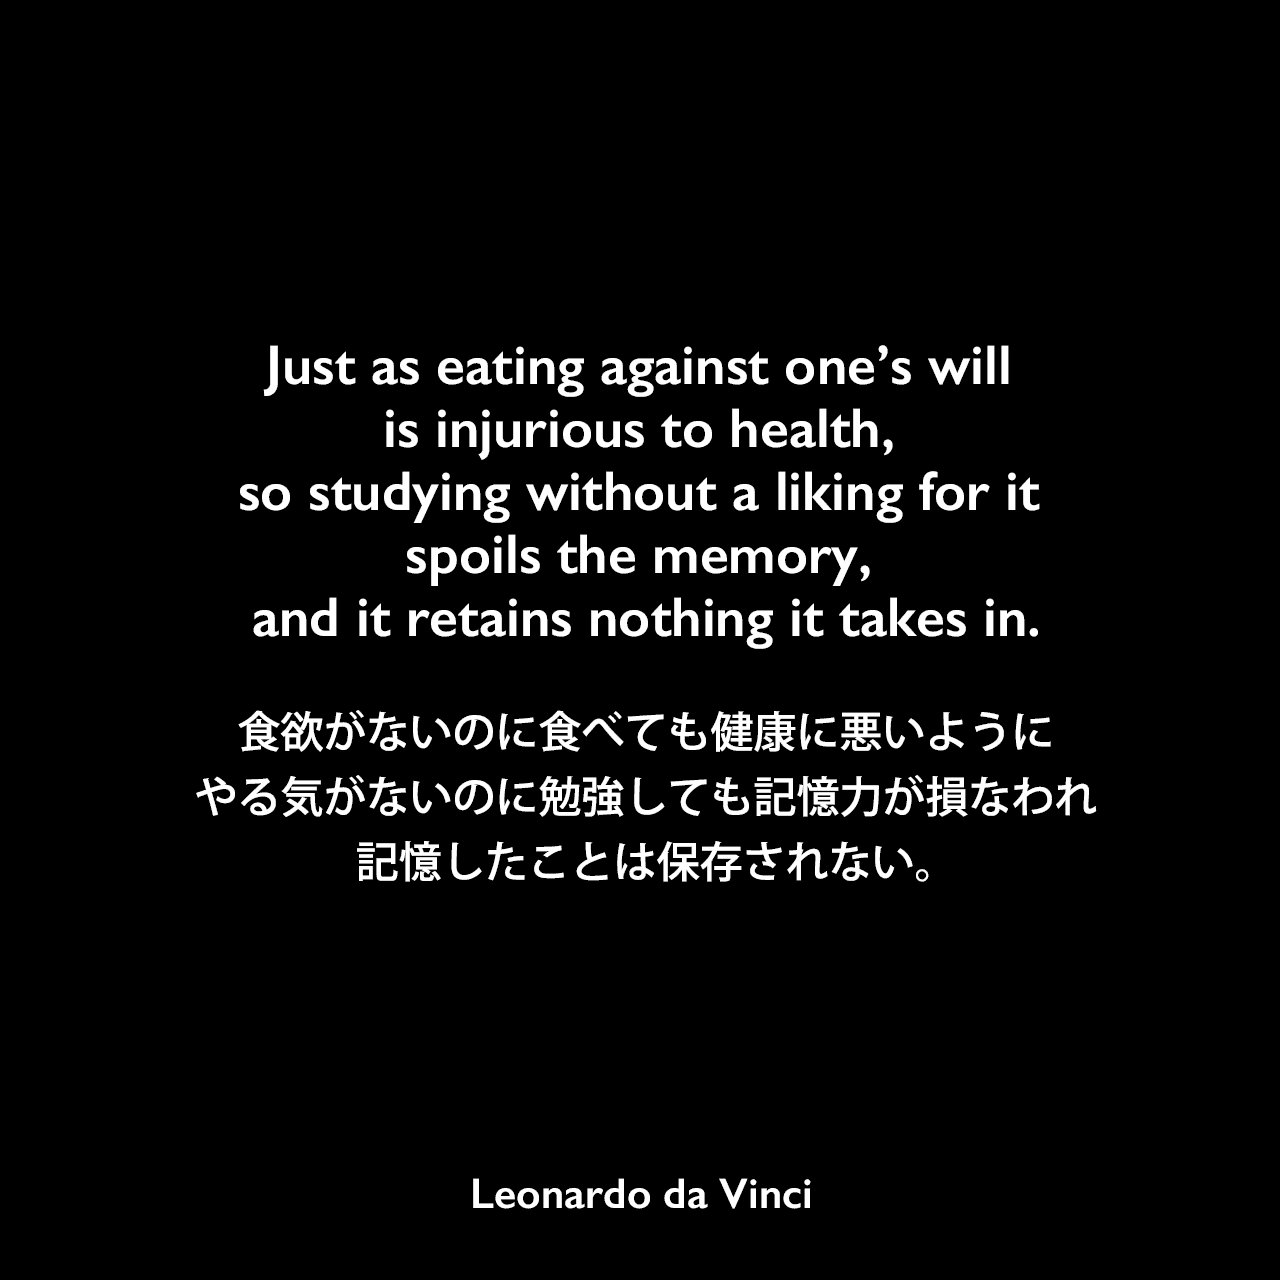 Just as eating against one’s will is injurious to health, so studying without a liking for it spoils the memory, and it retains nothing it takes in.食欲がないのに食べても健康に悪いように、やる気がないのに勉強しても記憶力が損なわれ、記憶したことは保存されない。- レオナルド・ダ・ヴィンチのノートよりLeonardo da Vinci